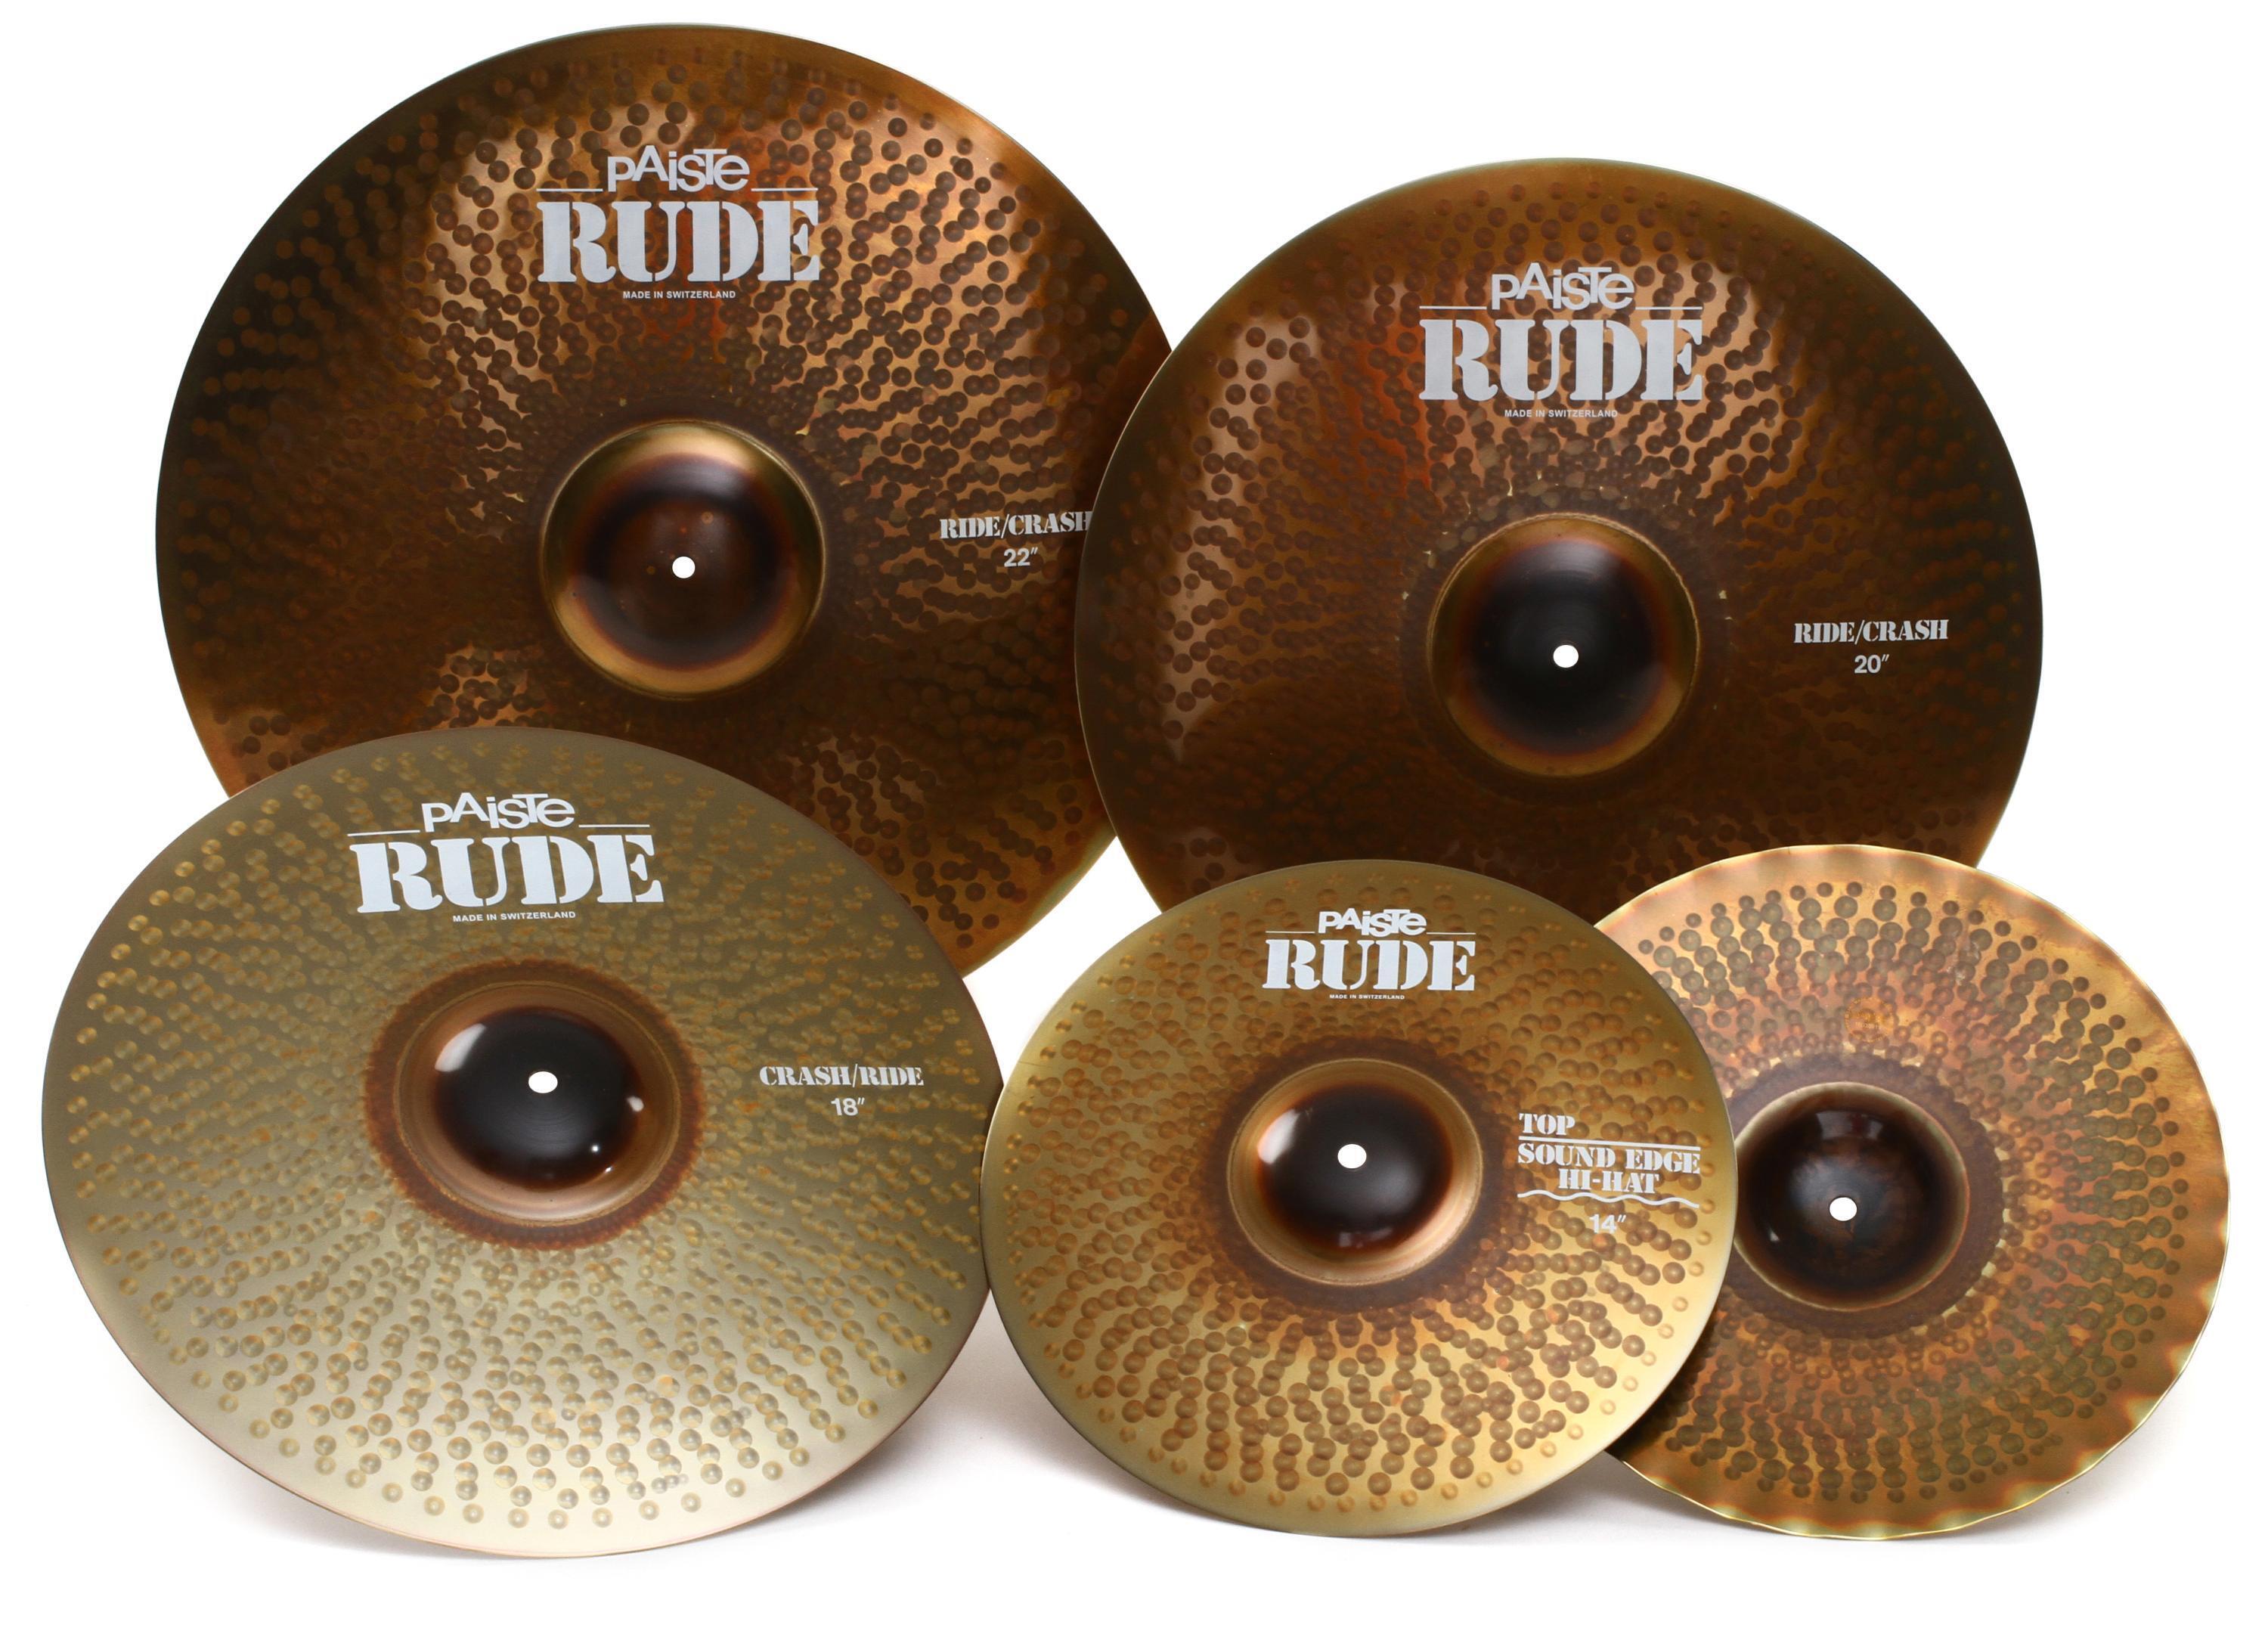 Paiste RUDE Cymbal Set - 14/20/22 inch - with Free 18 inch Crash